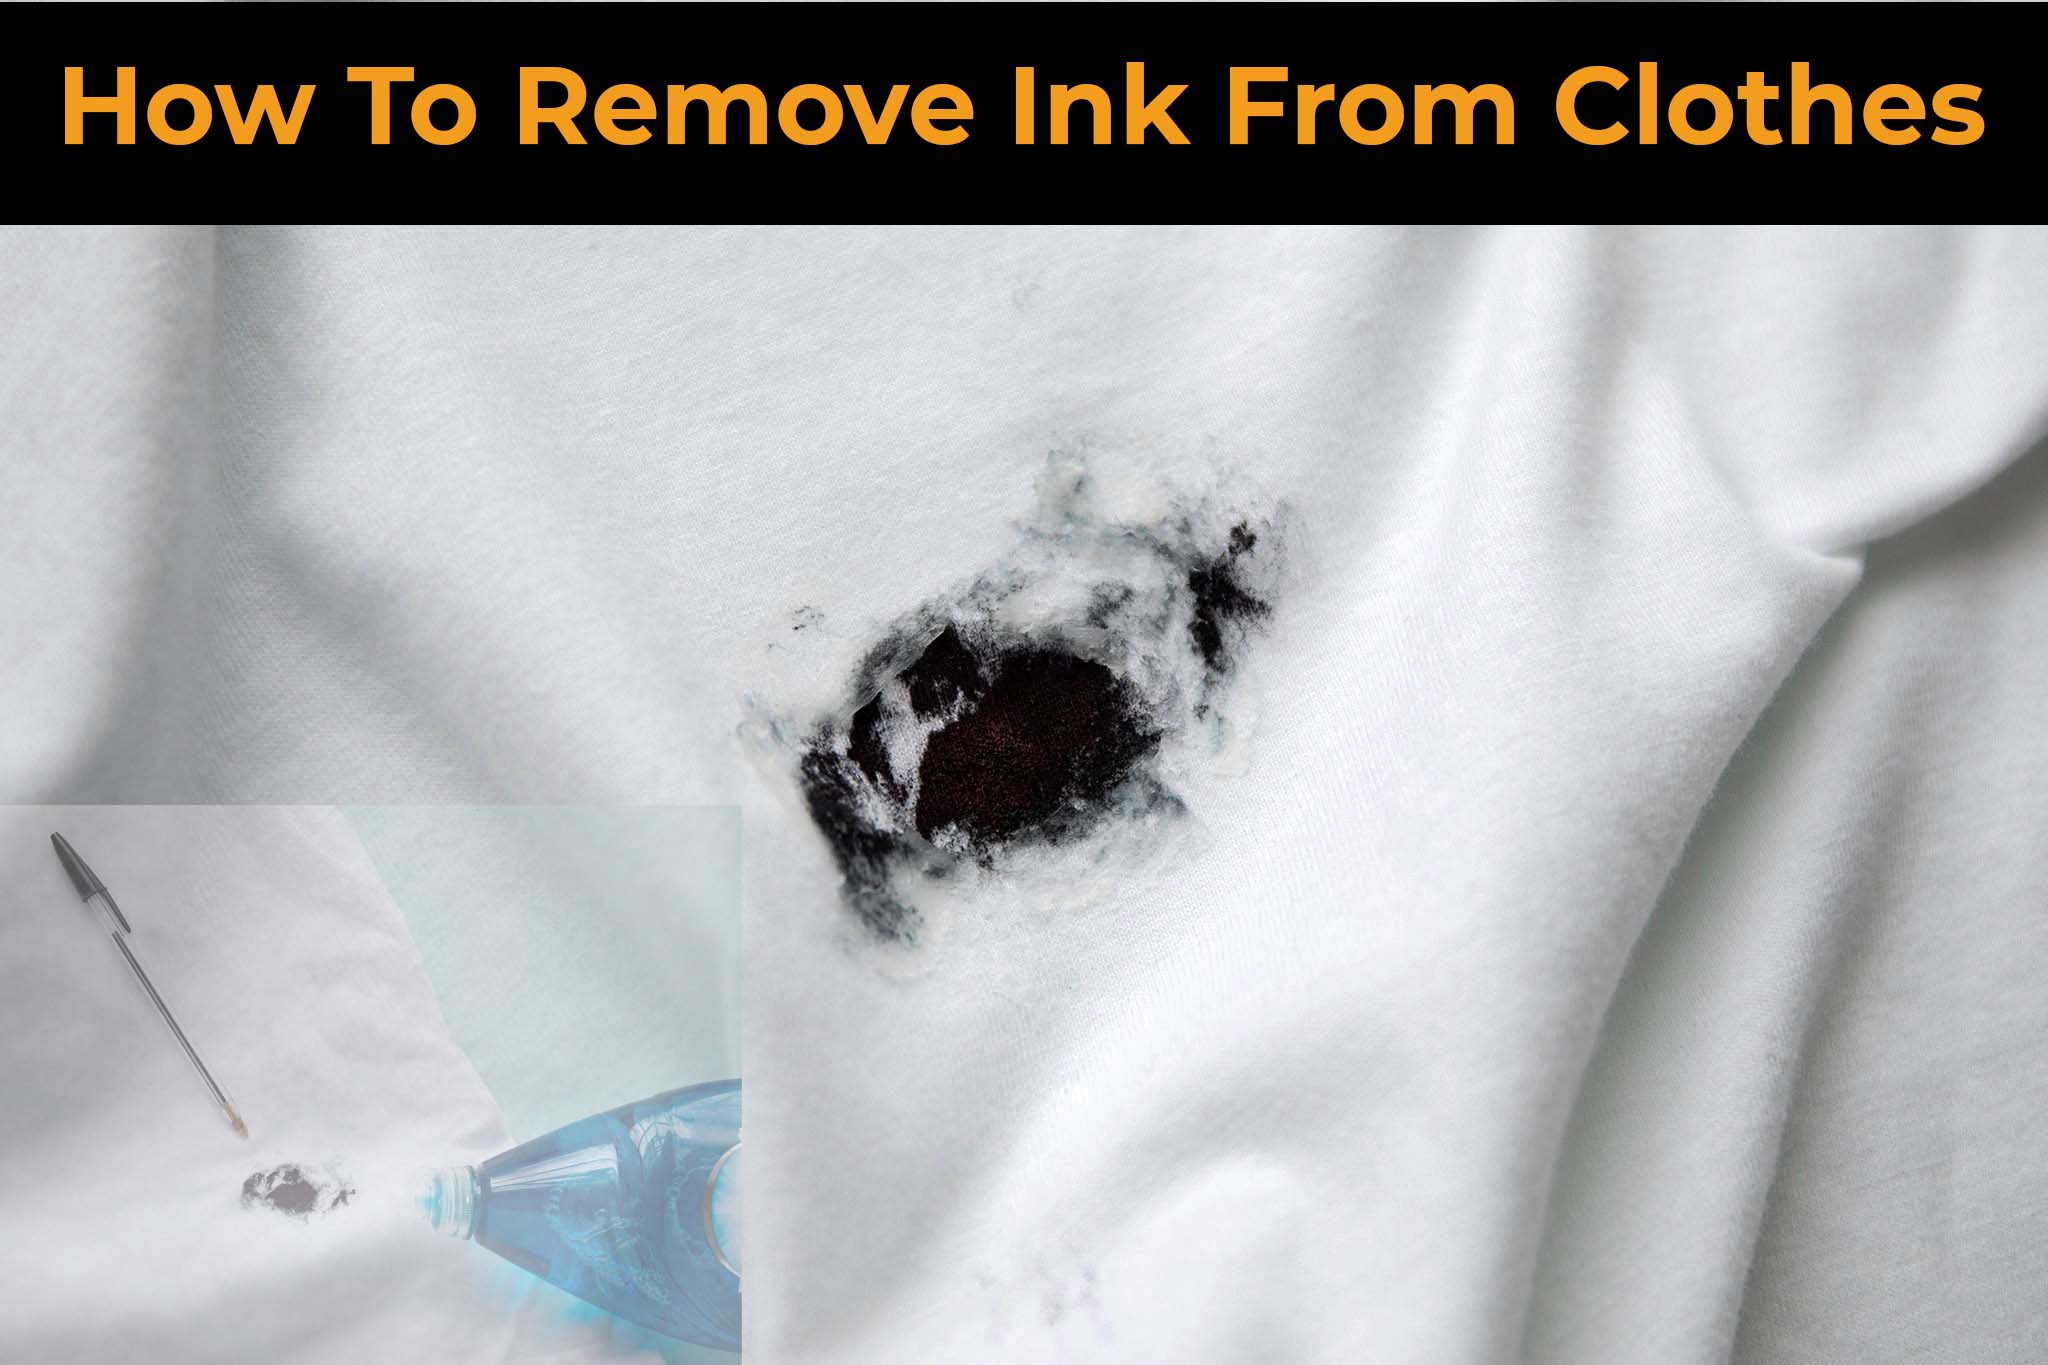 How-to-remove-ink-from-clothes